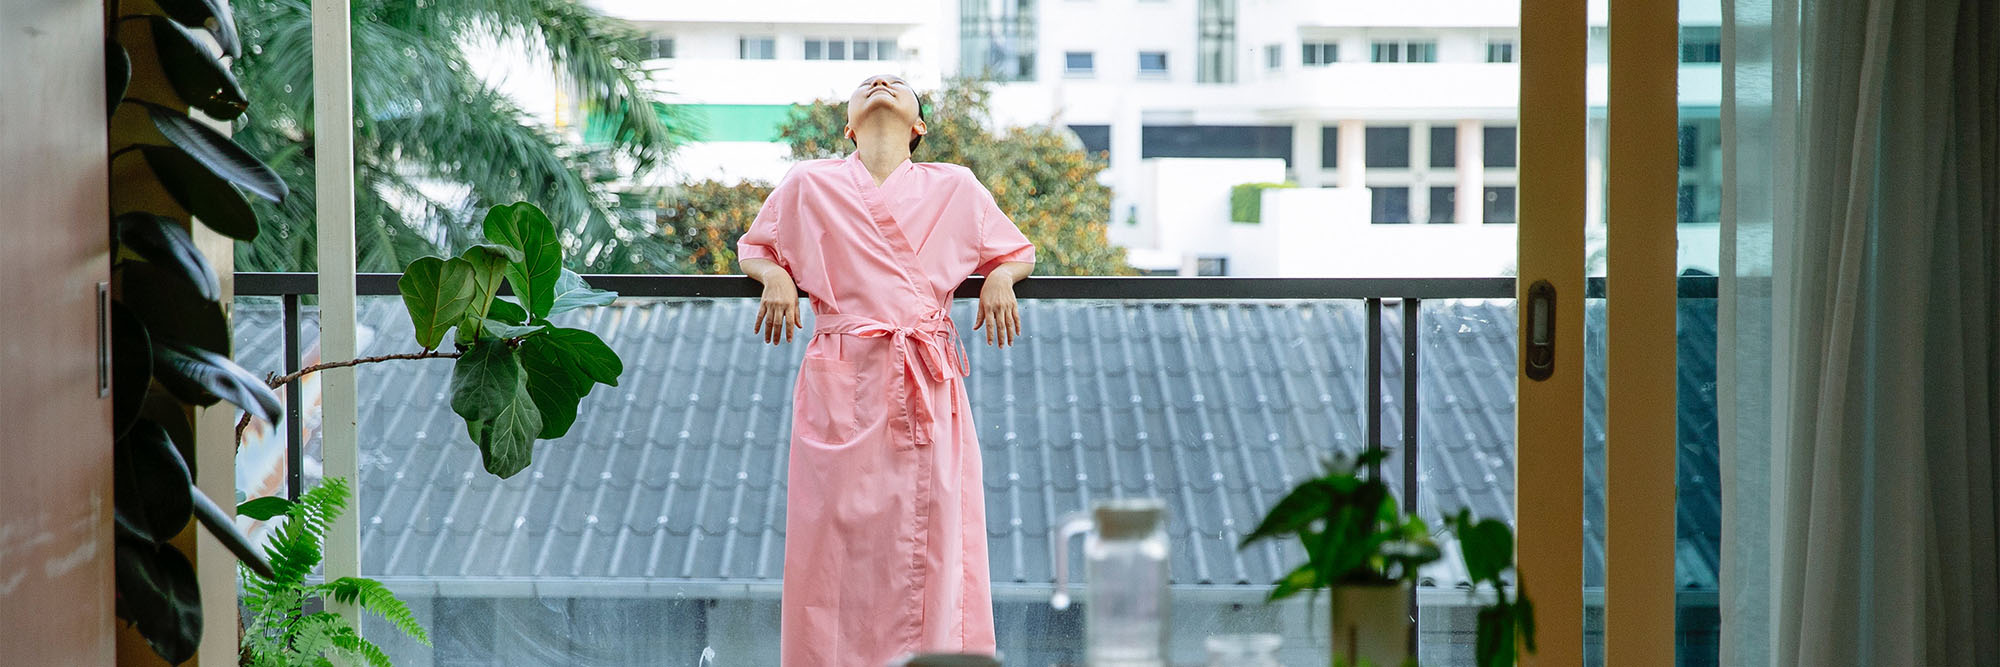 Woman standing on balcony and enjoying morning time